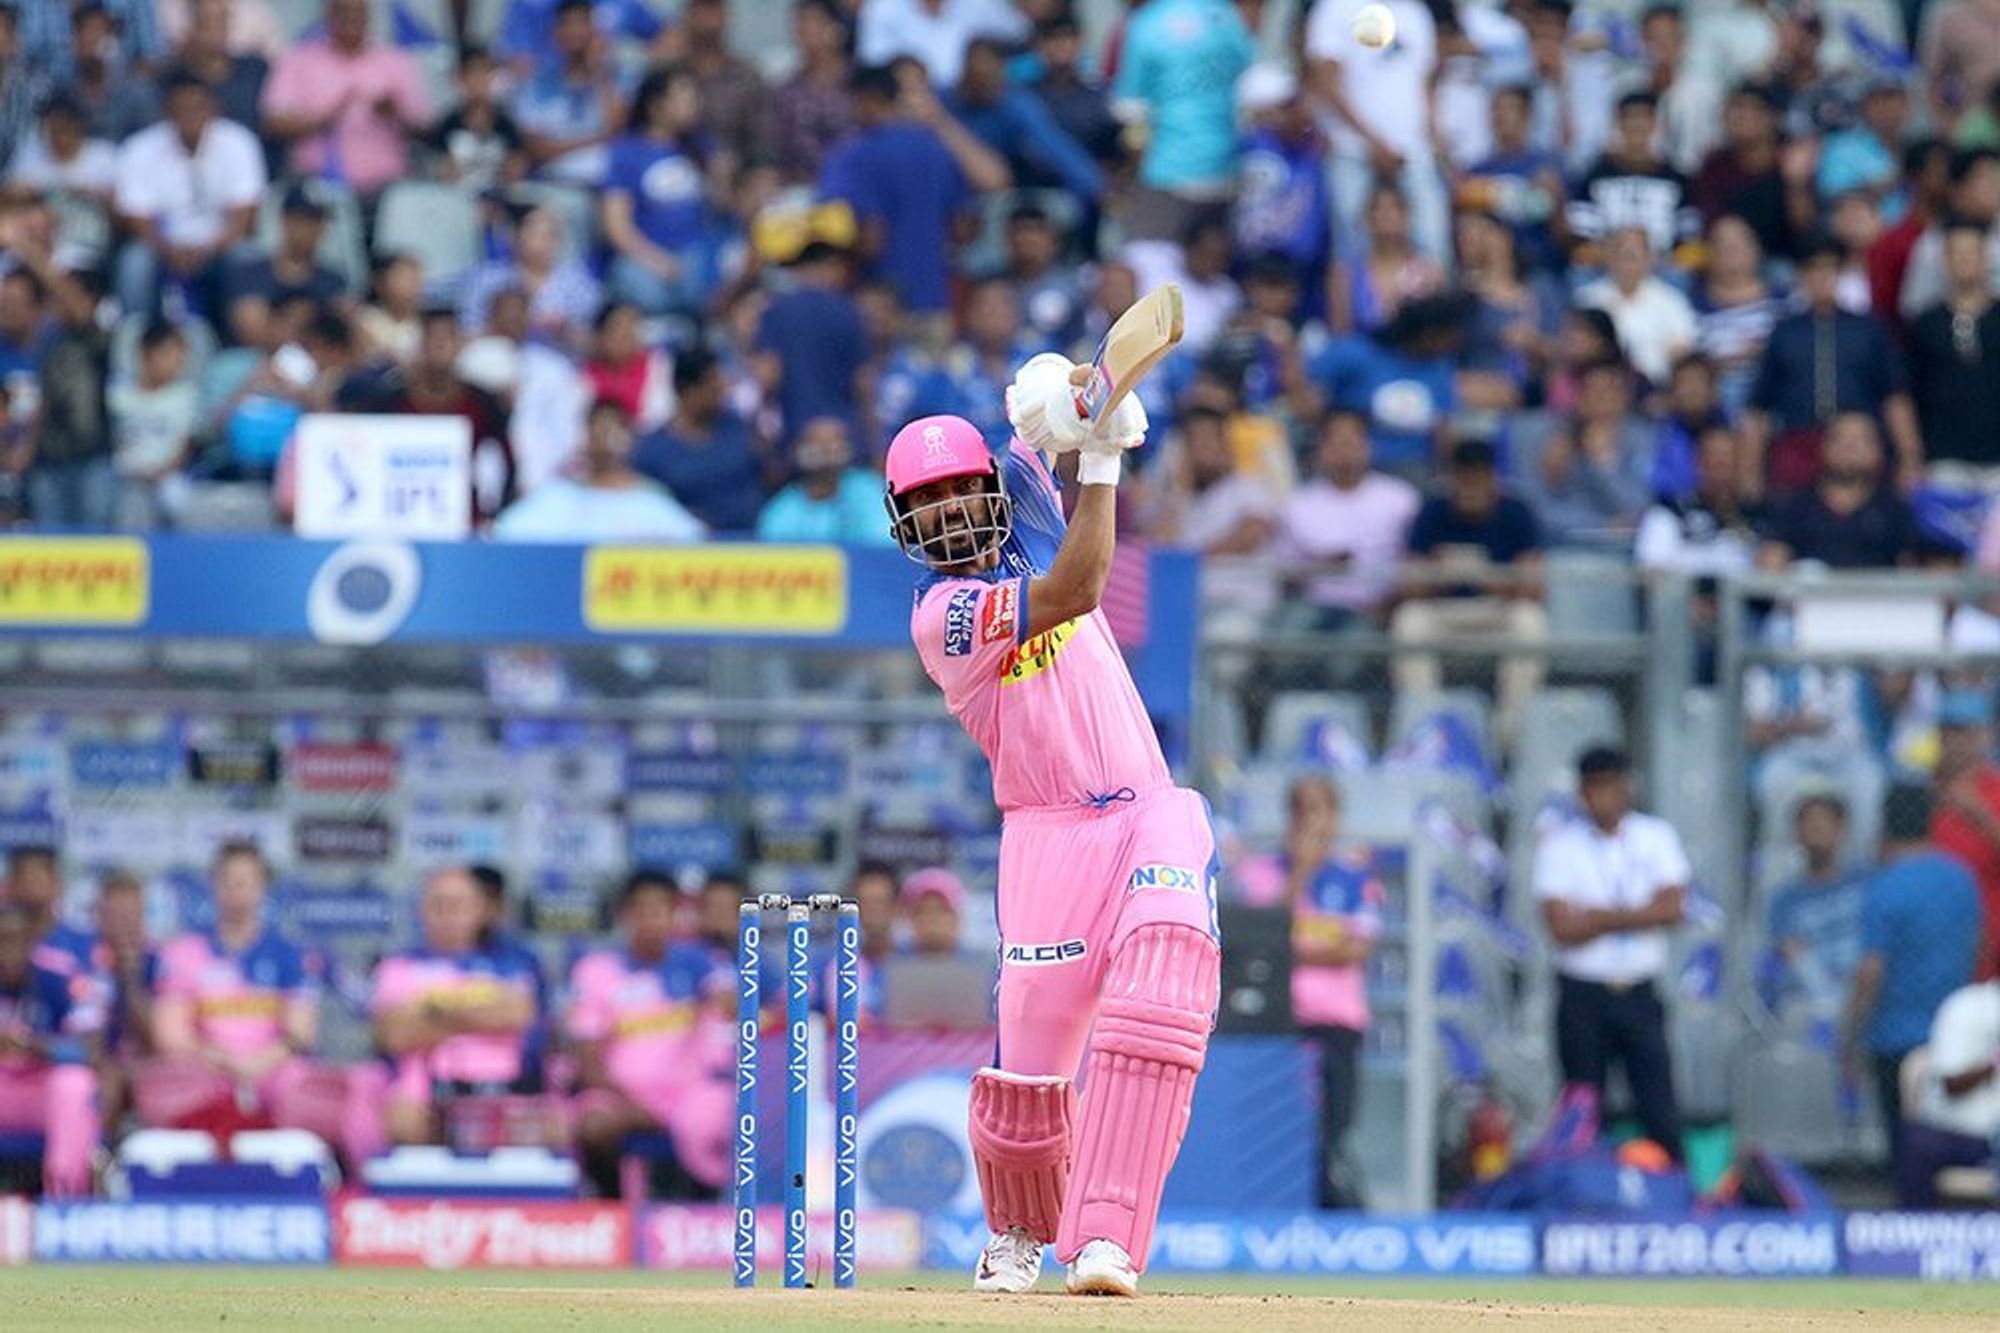 IPL 2020 | We’ll miss fans but their safety is important for players, asserts Ajinkya Rahane